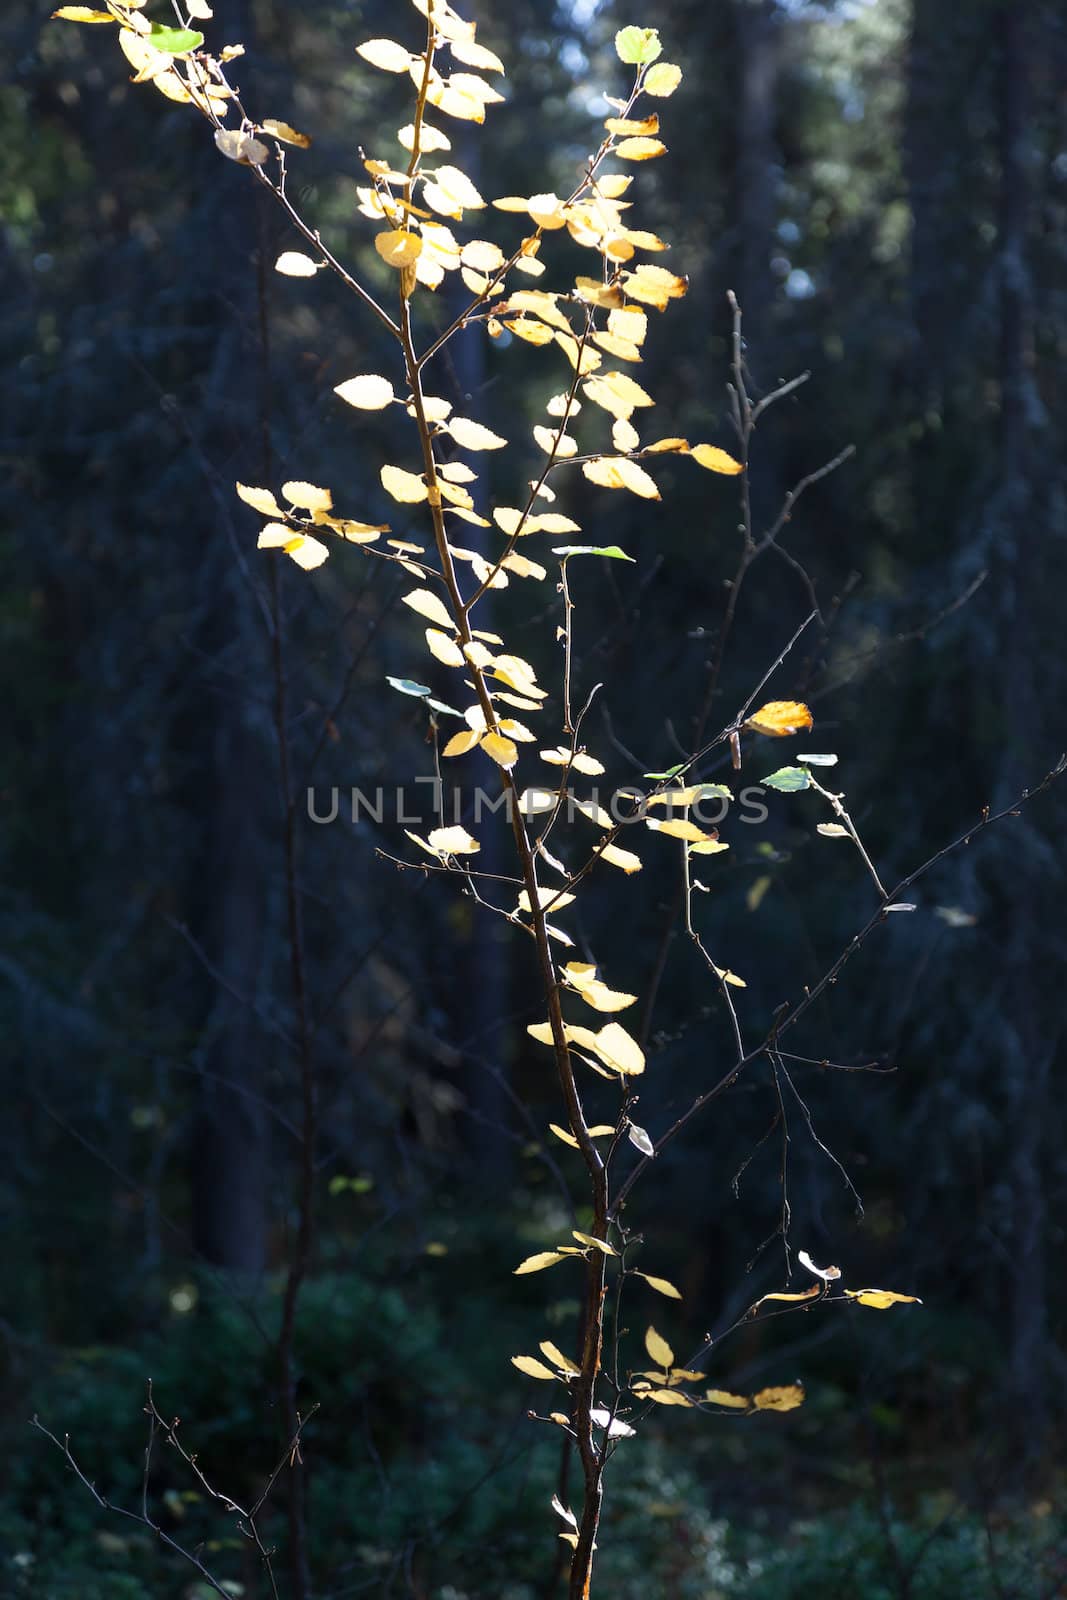 A tree with golden leaves against the dark blue of the forest. An unusual fairytale landscape